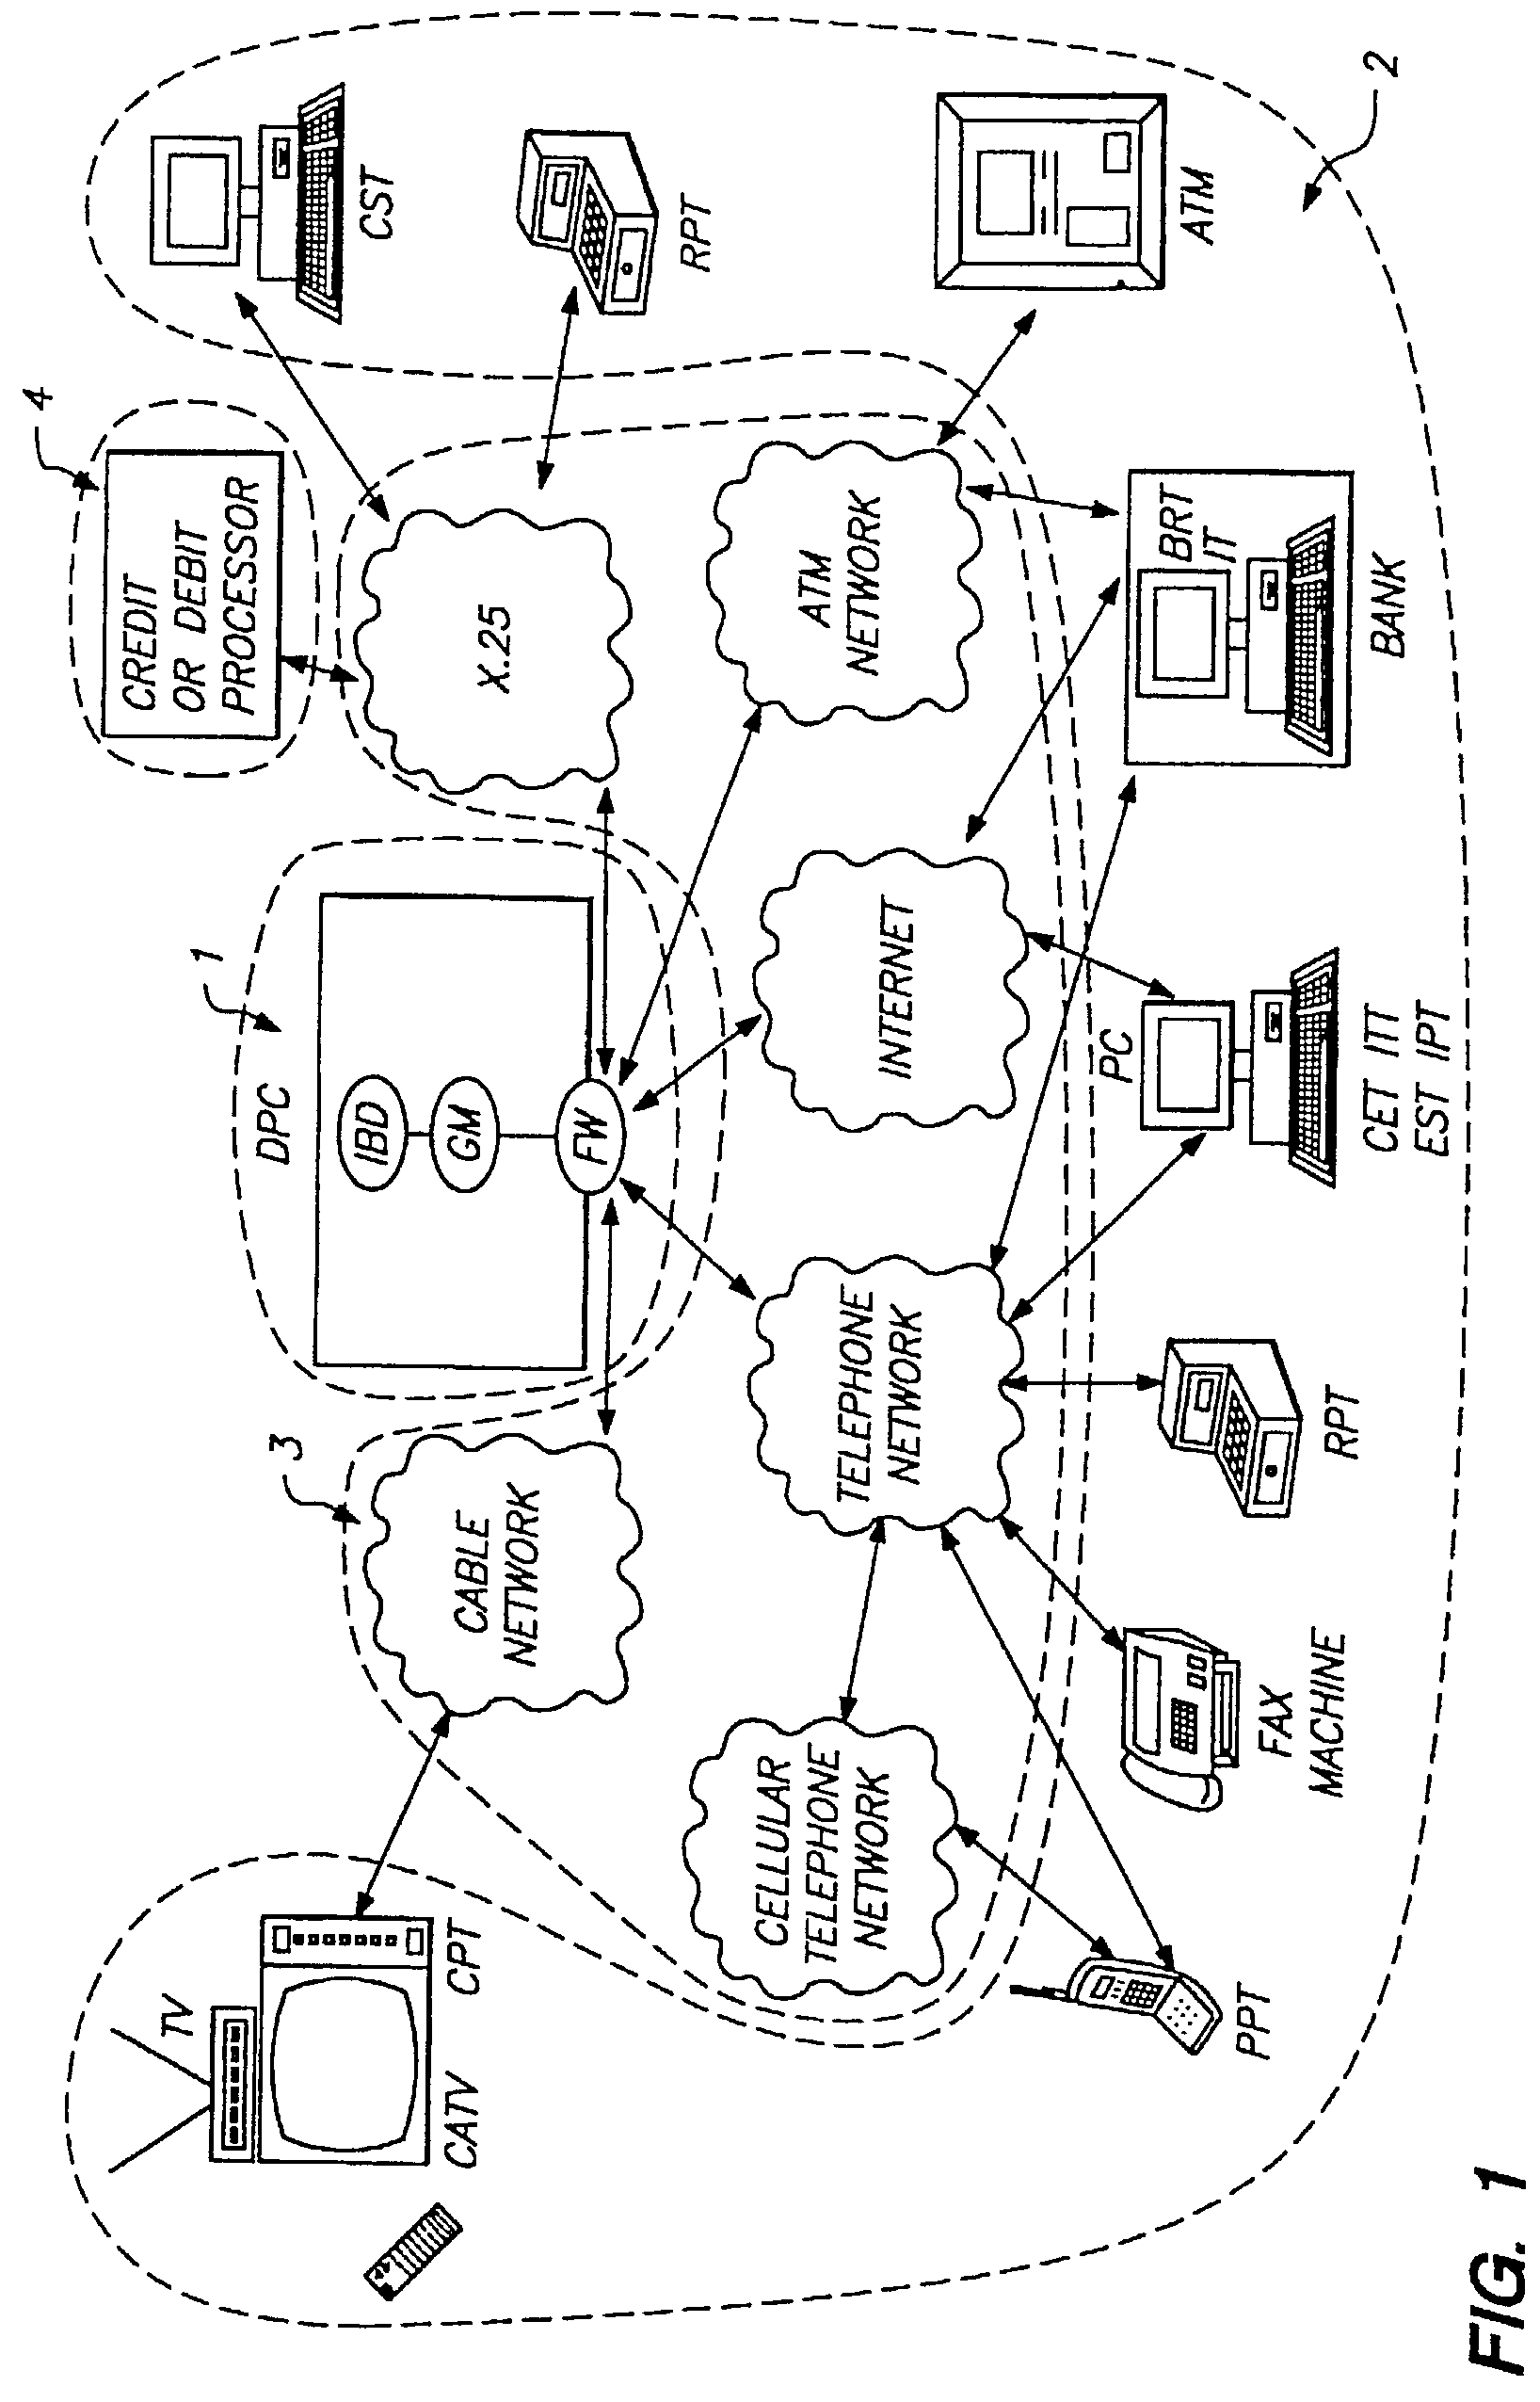 Tokenless identification system for authorization of electronic transactions and electronic transmissions